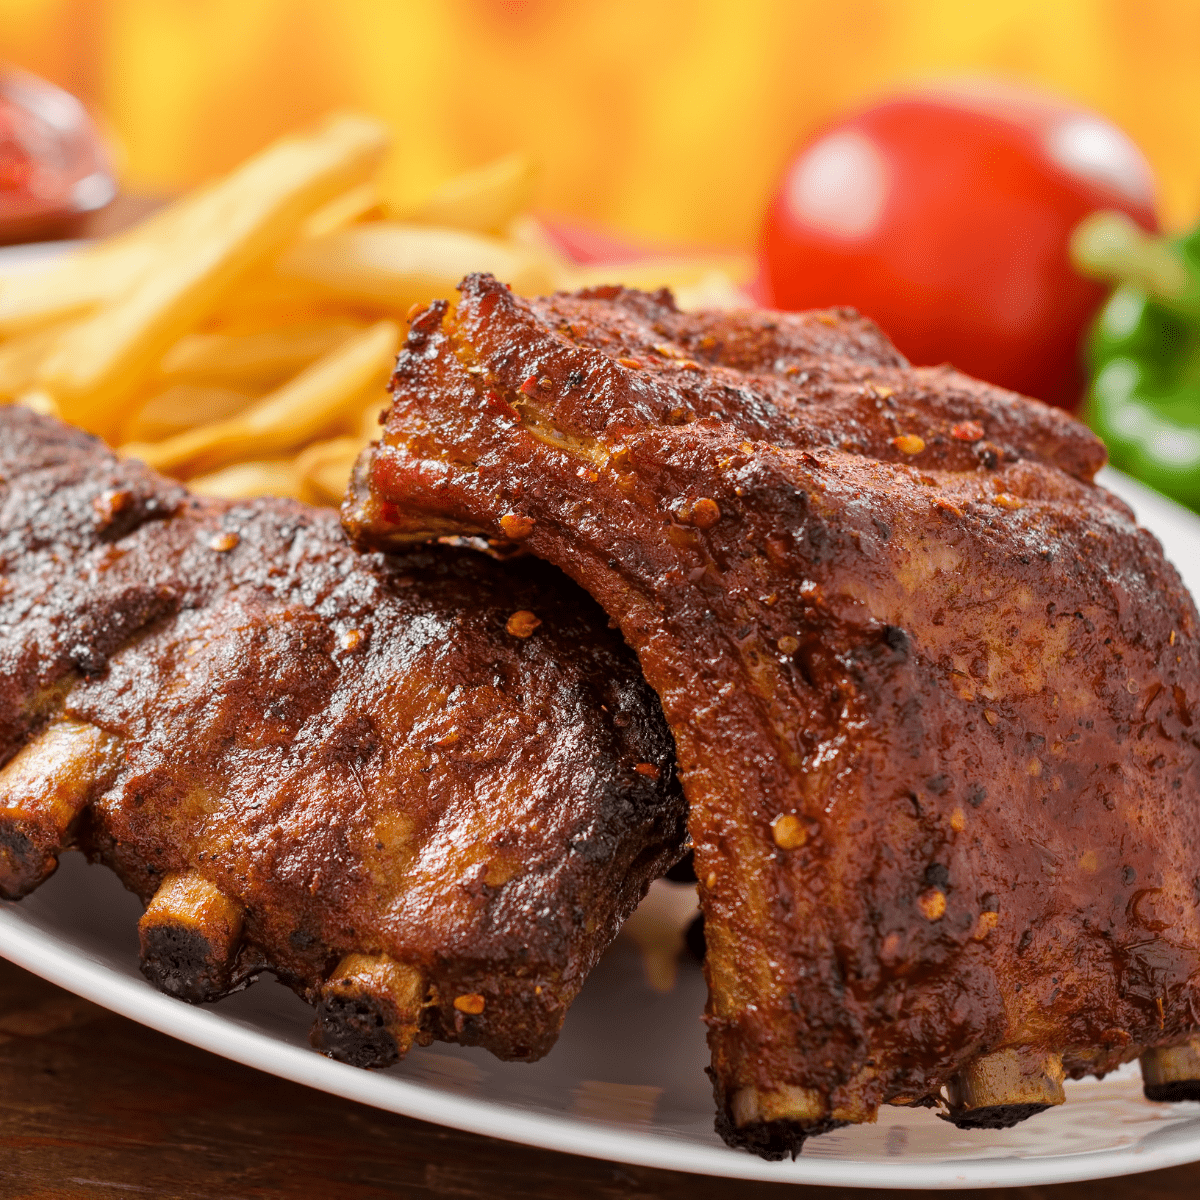 A plate of ribs ready to eat.